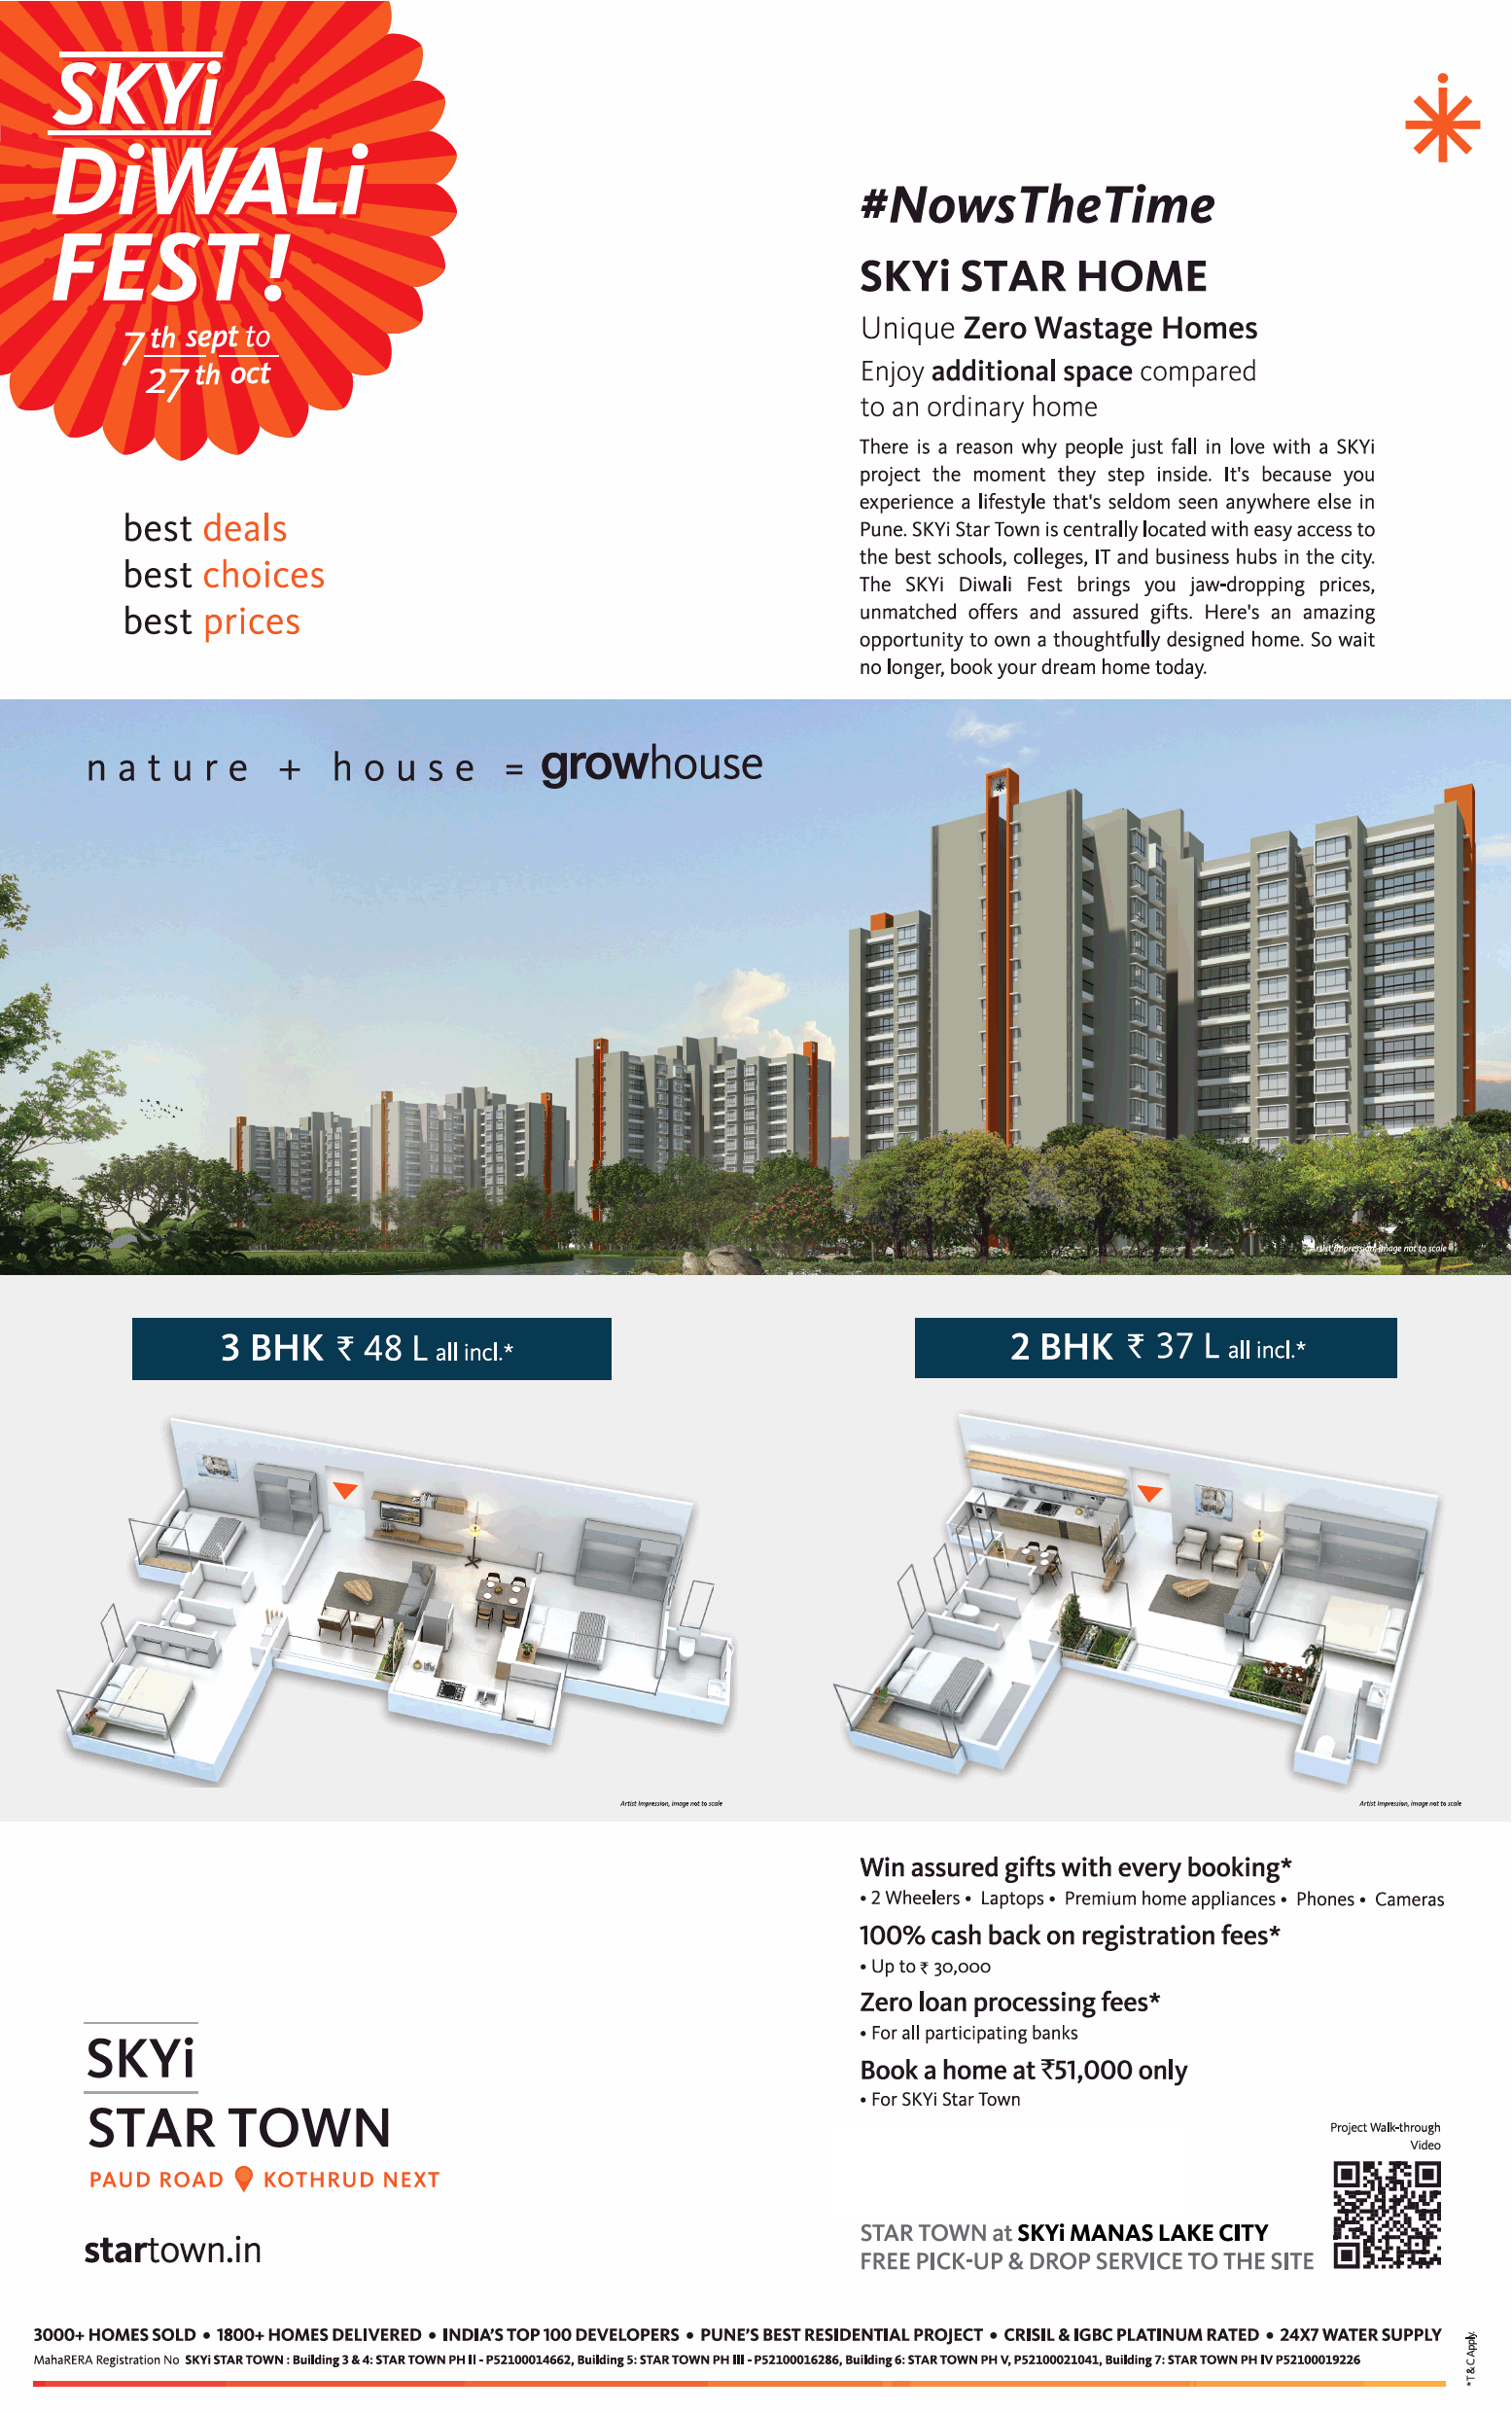 Book 3 BHK Rs 48 lakh at SKYi Star Home, Pune